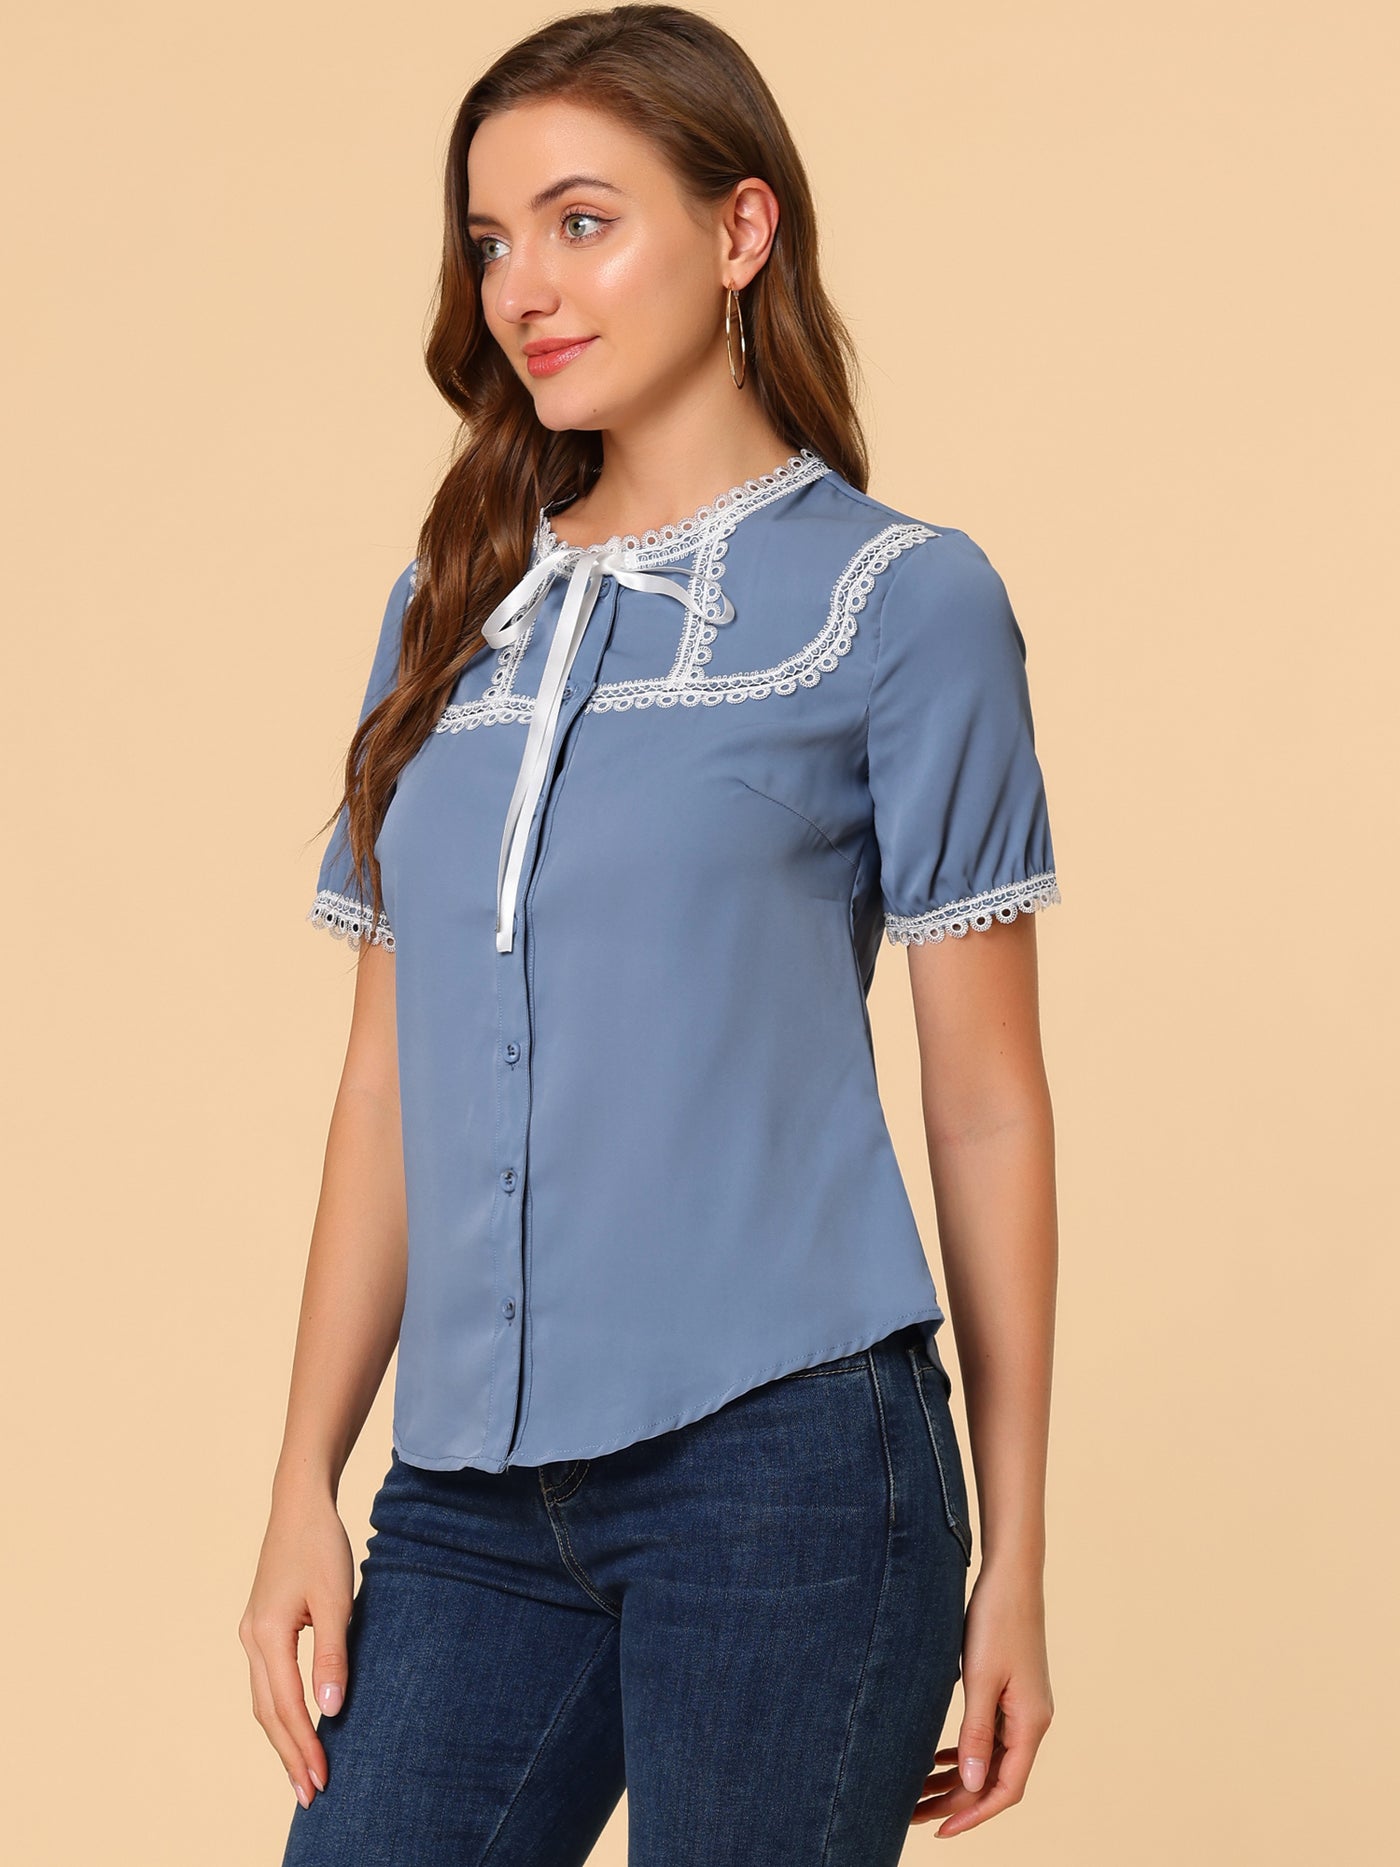 Allegra K Short Sleeve Blouse Lace Panel Bow Tie Collar Button Down Shirt